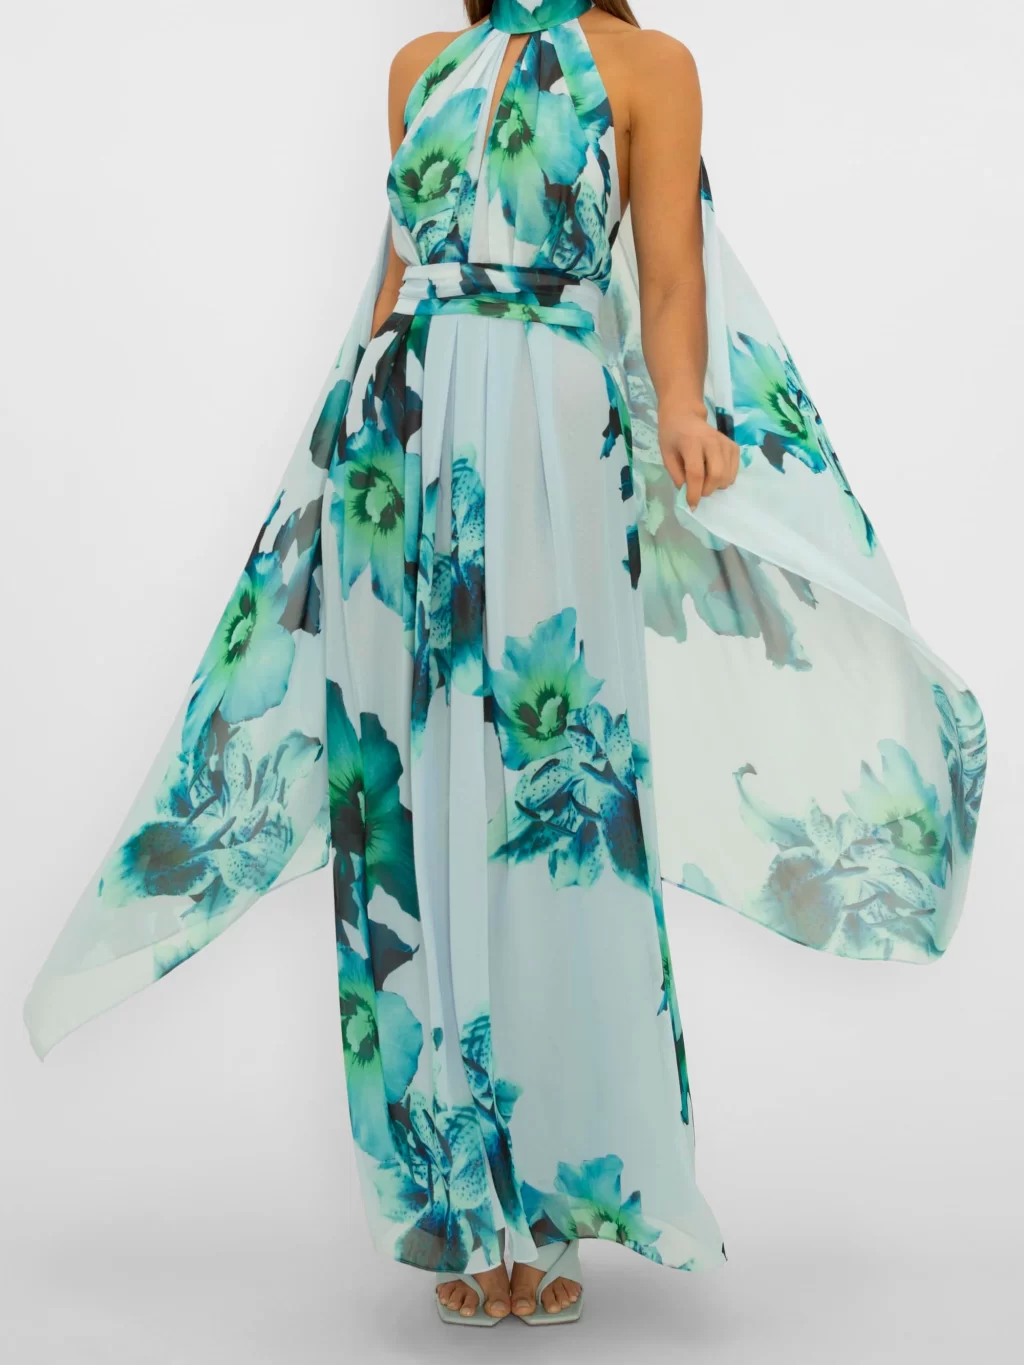 Style Hire by Sarah-blue-mid-summer-nights-dream-gown-1 1600x@2x